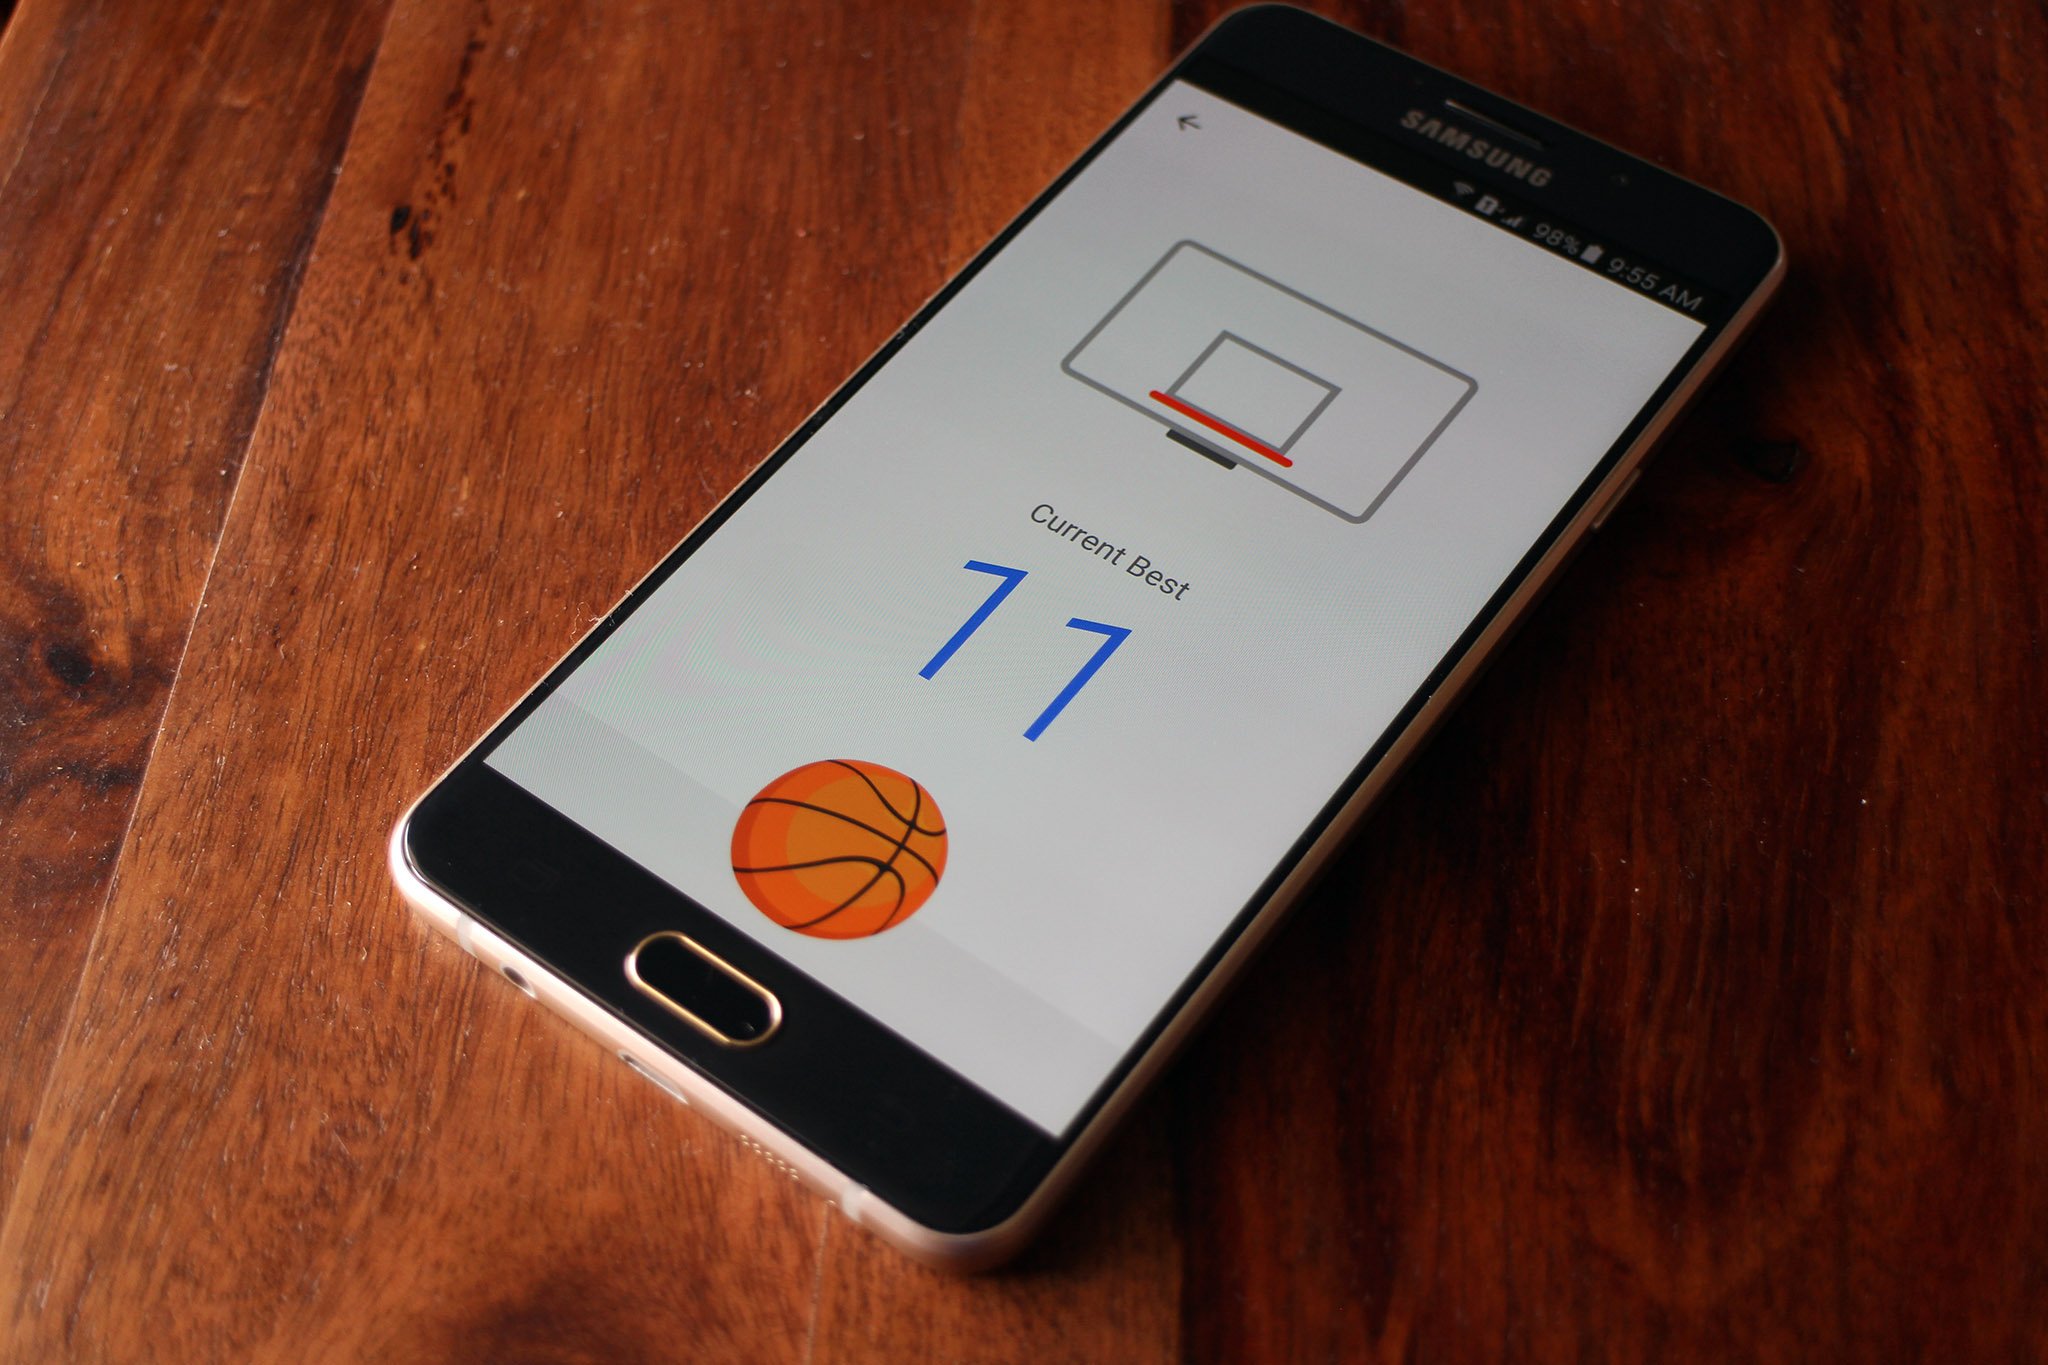 Here's how you can play Facebook Messenger's hidden basketball game